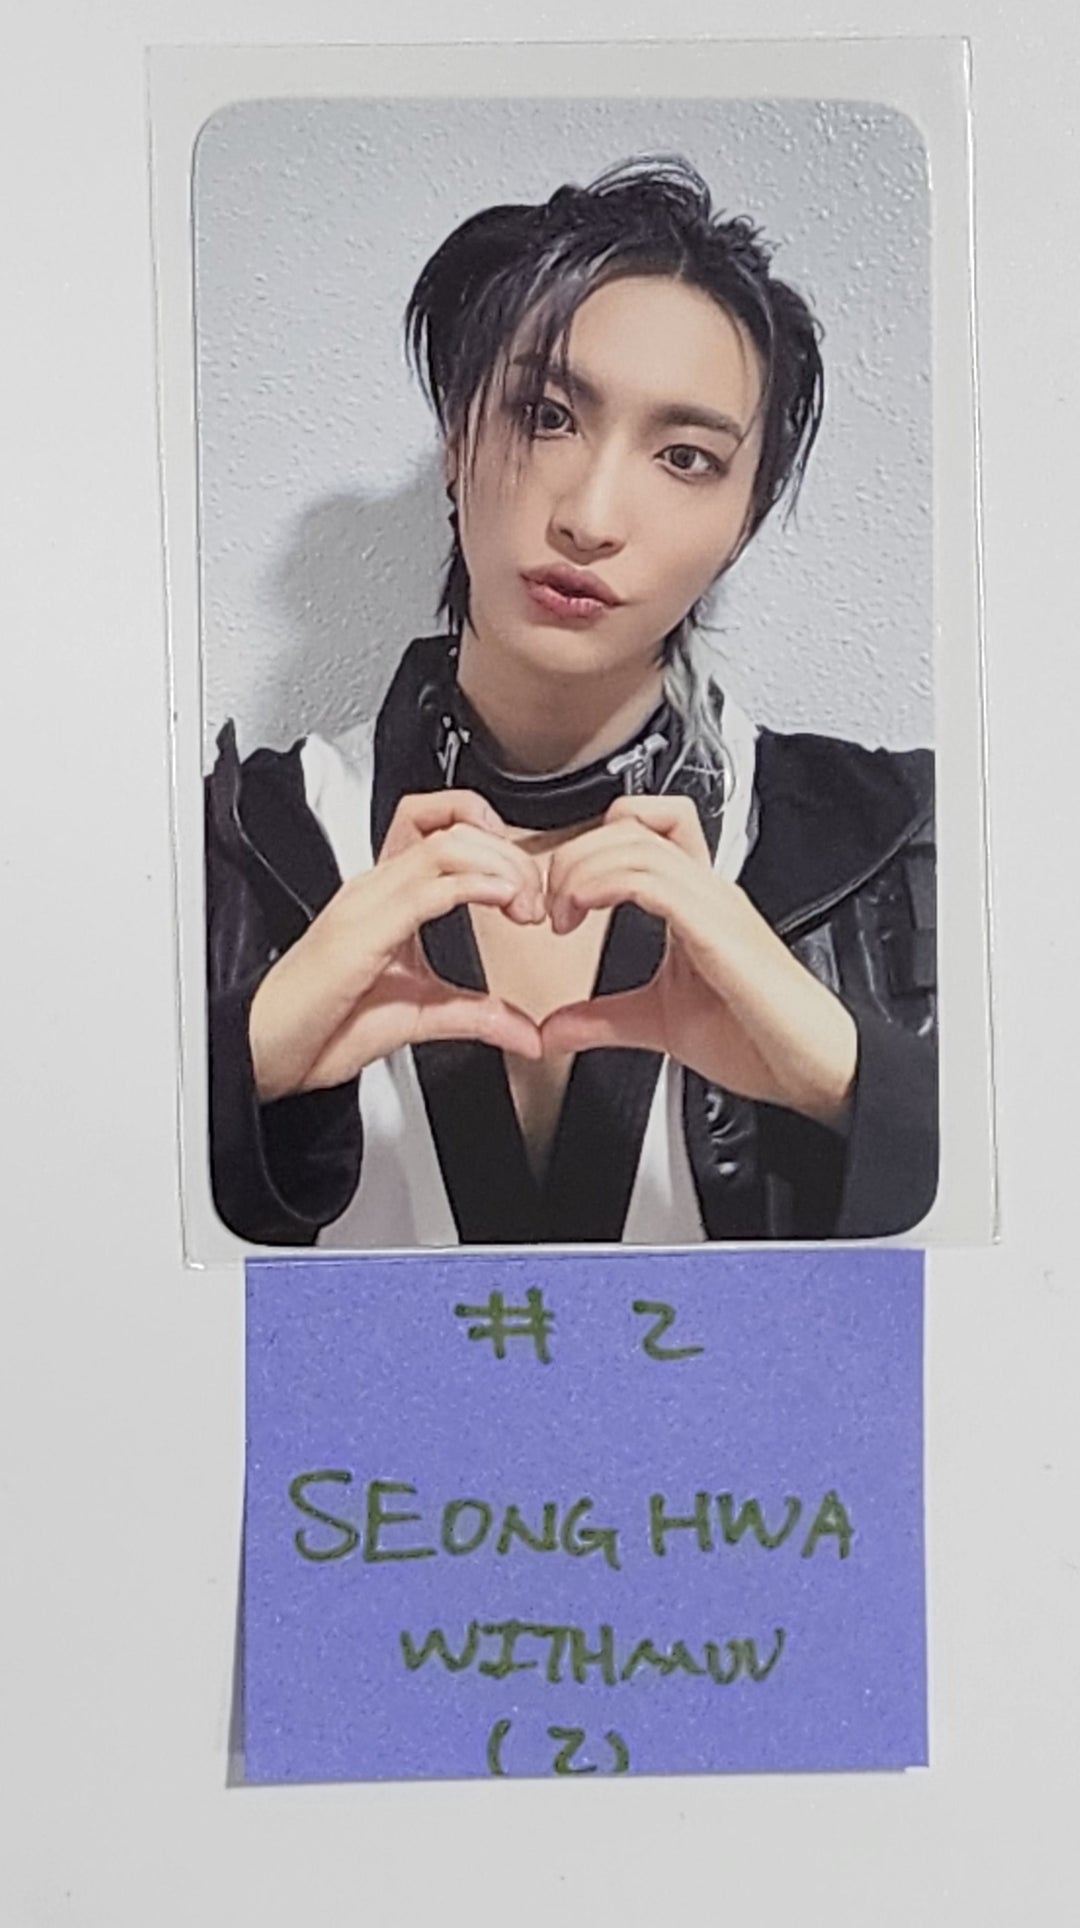 Ateez - "The World Ep.Fin : Will" Withmuu Fansign Event Photocard [24.1.10]